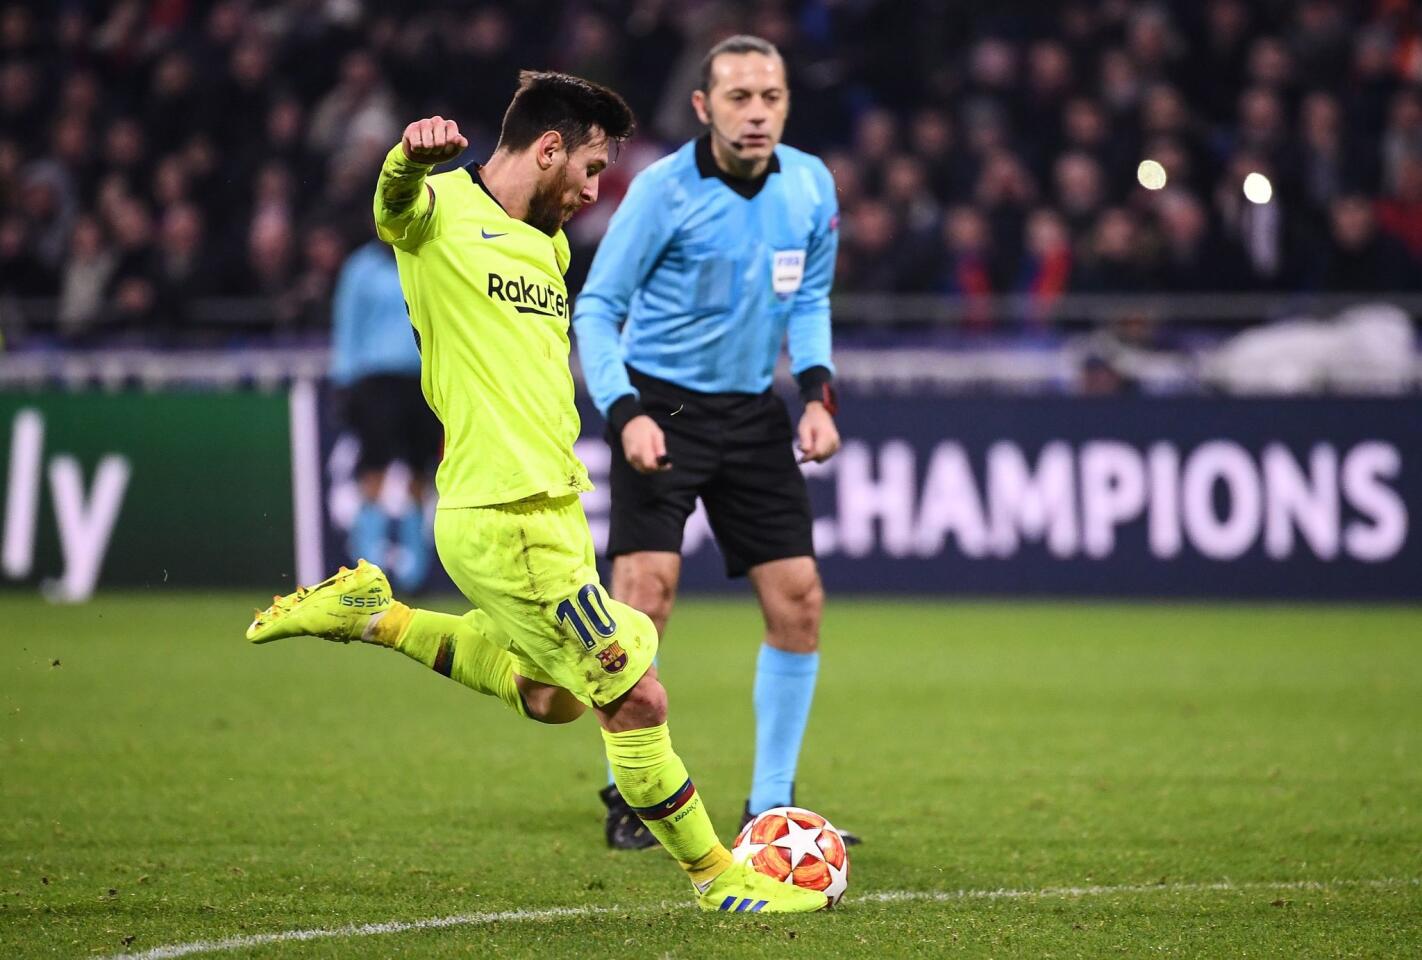 Barcelona's Argentinian forward Lionel Messi prepares to shoot the ball during the UEFA Champions League round of 16 first leg football match between Lyon (OL) and FC Barcelona on February 19, 2019, at the Groupama Stadium in Decines-Charpieu, central-eastern France. (Photo by FRANCK FIFE / AFP)FRANCK FIFE/AFP/Getty Images ** OUTS - ELSENT, FPG, CM - OUTS * NM, PH, VA if sourced by CT, LA or MoD **